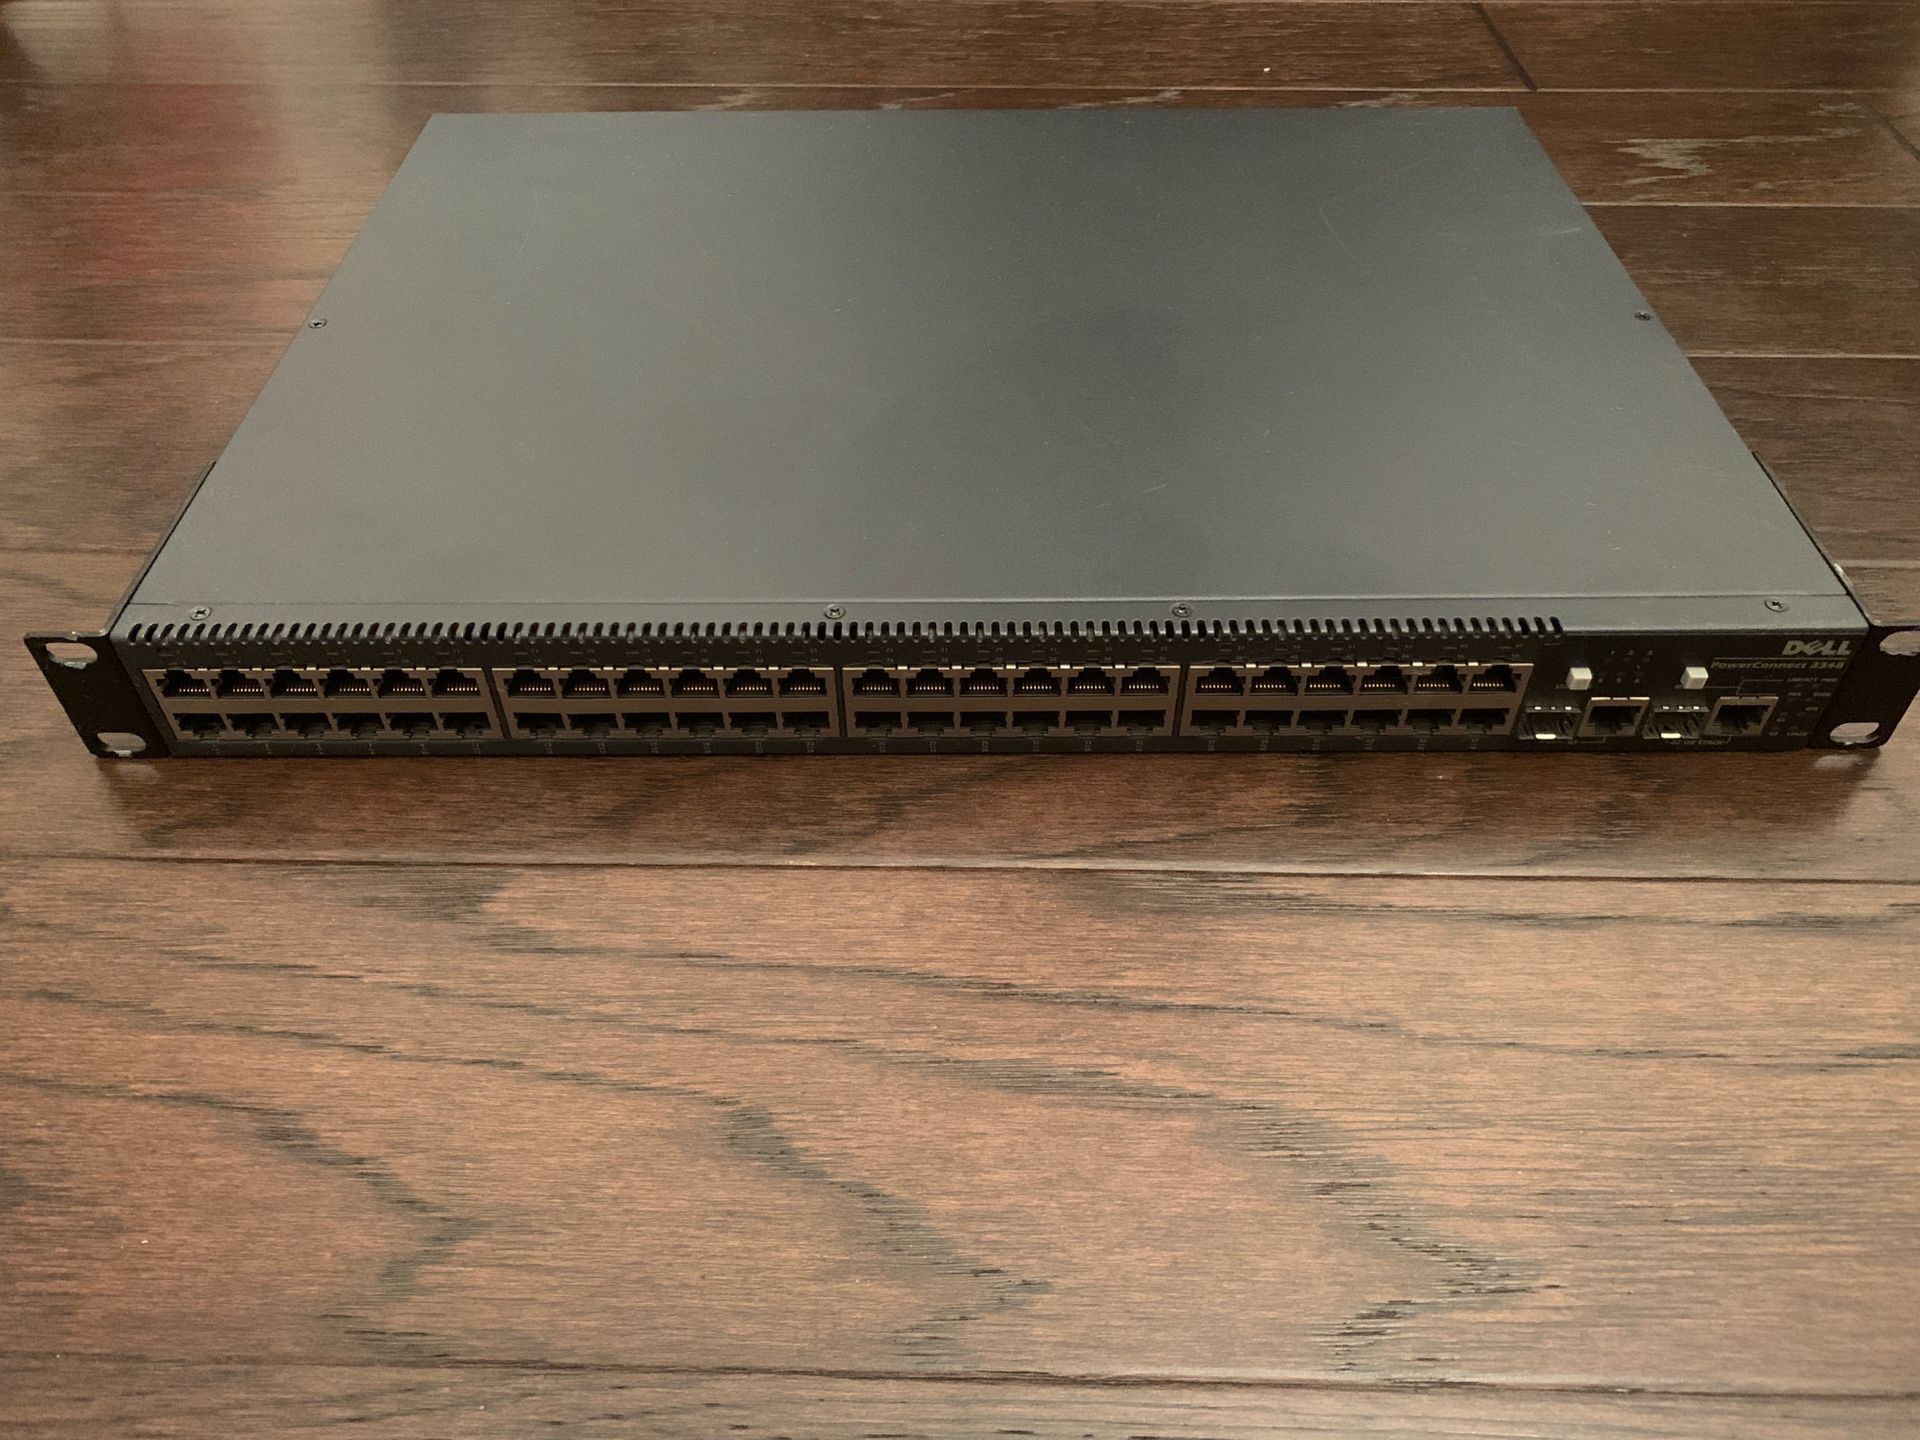 Dell power-connect 3348